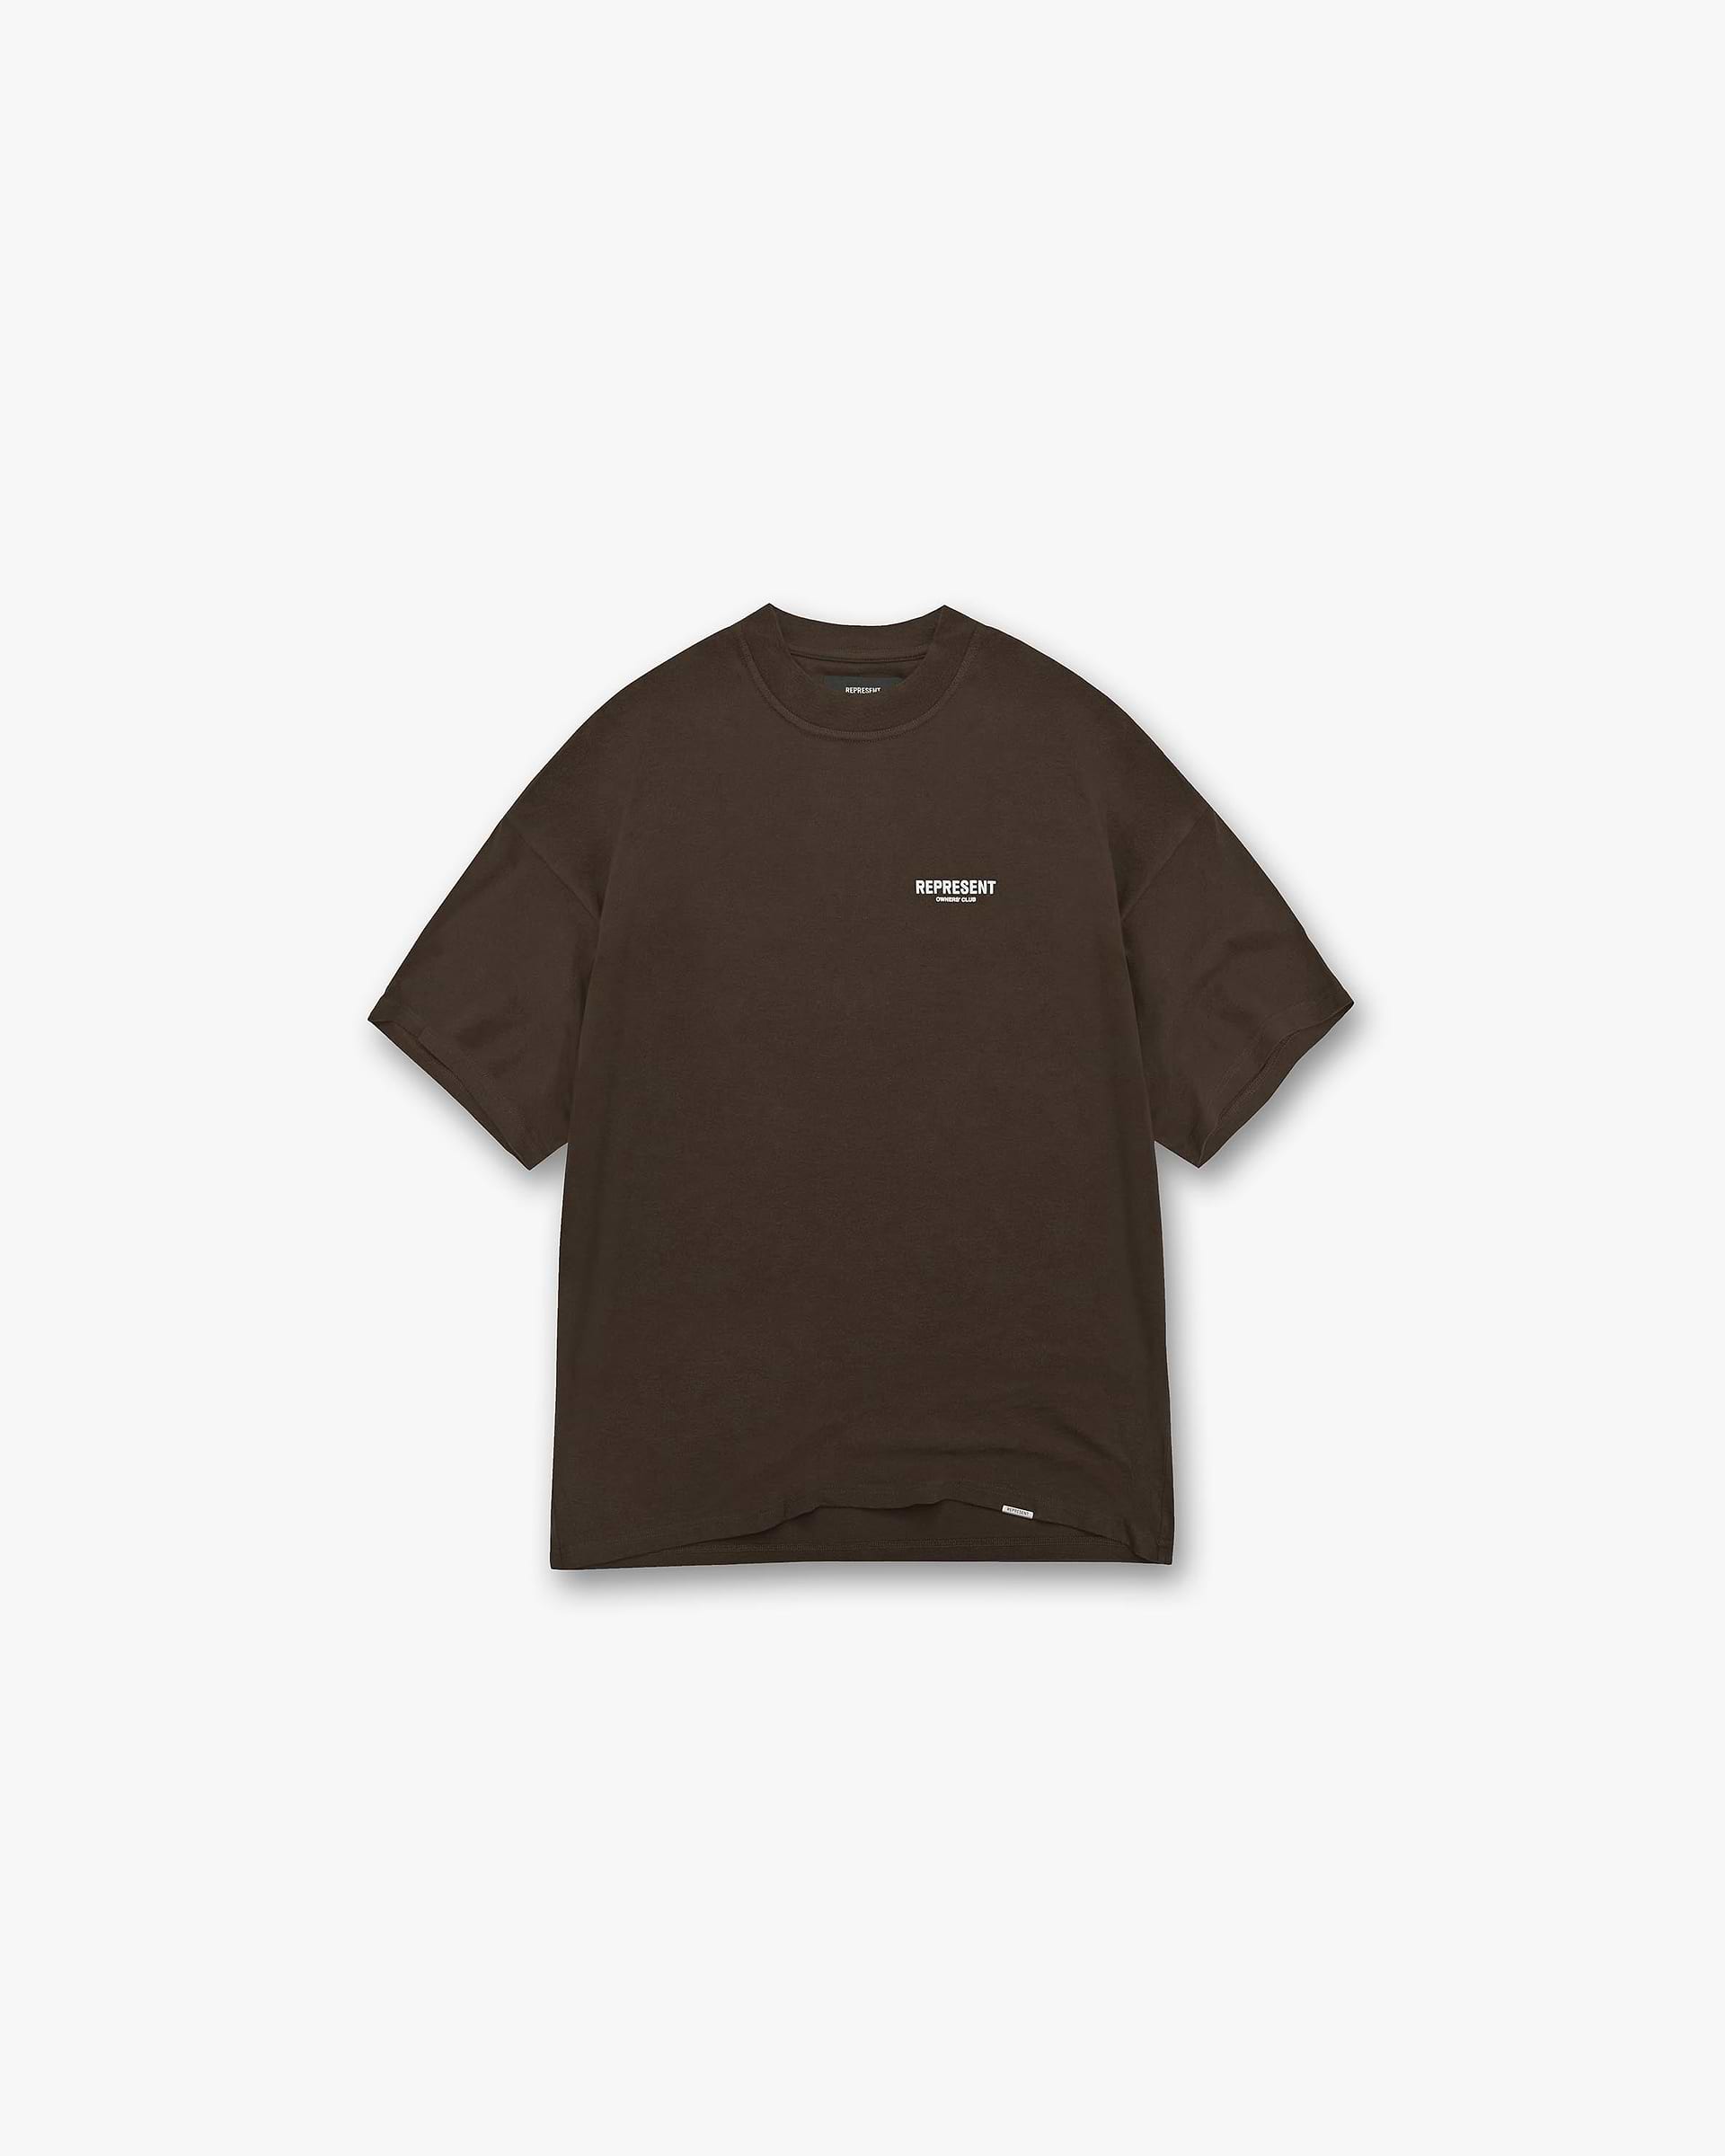 Represent Owners Club T-Shirt | Brown T-Shirts Owners Club | Represent Clo